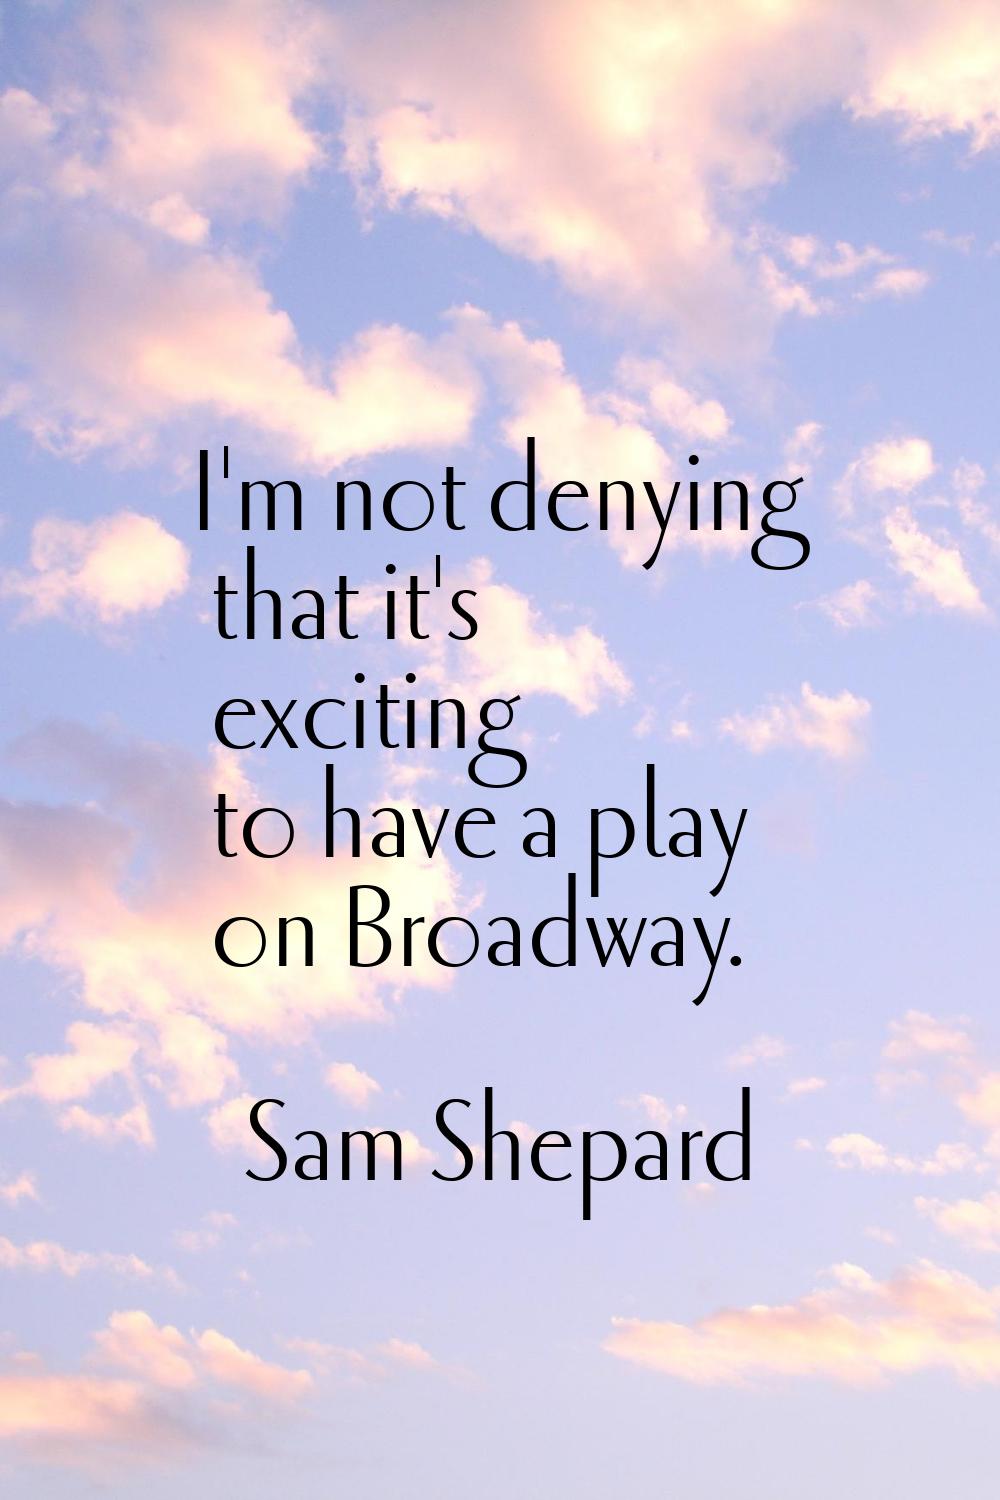 I'm not denying that it's exciting to have a play on Broadway.